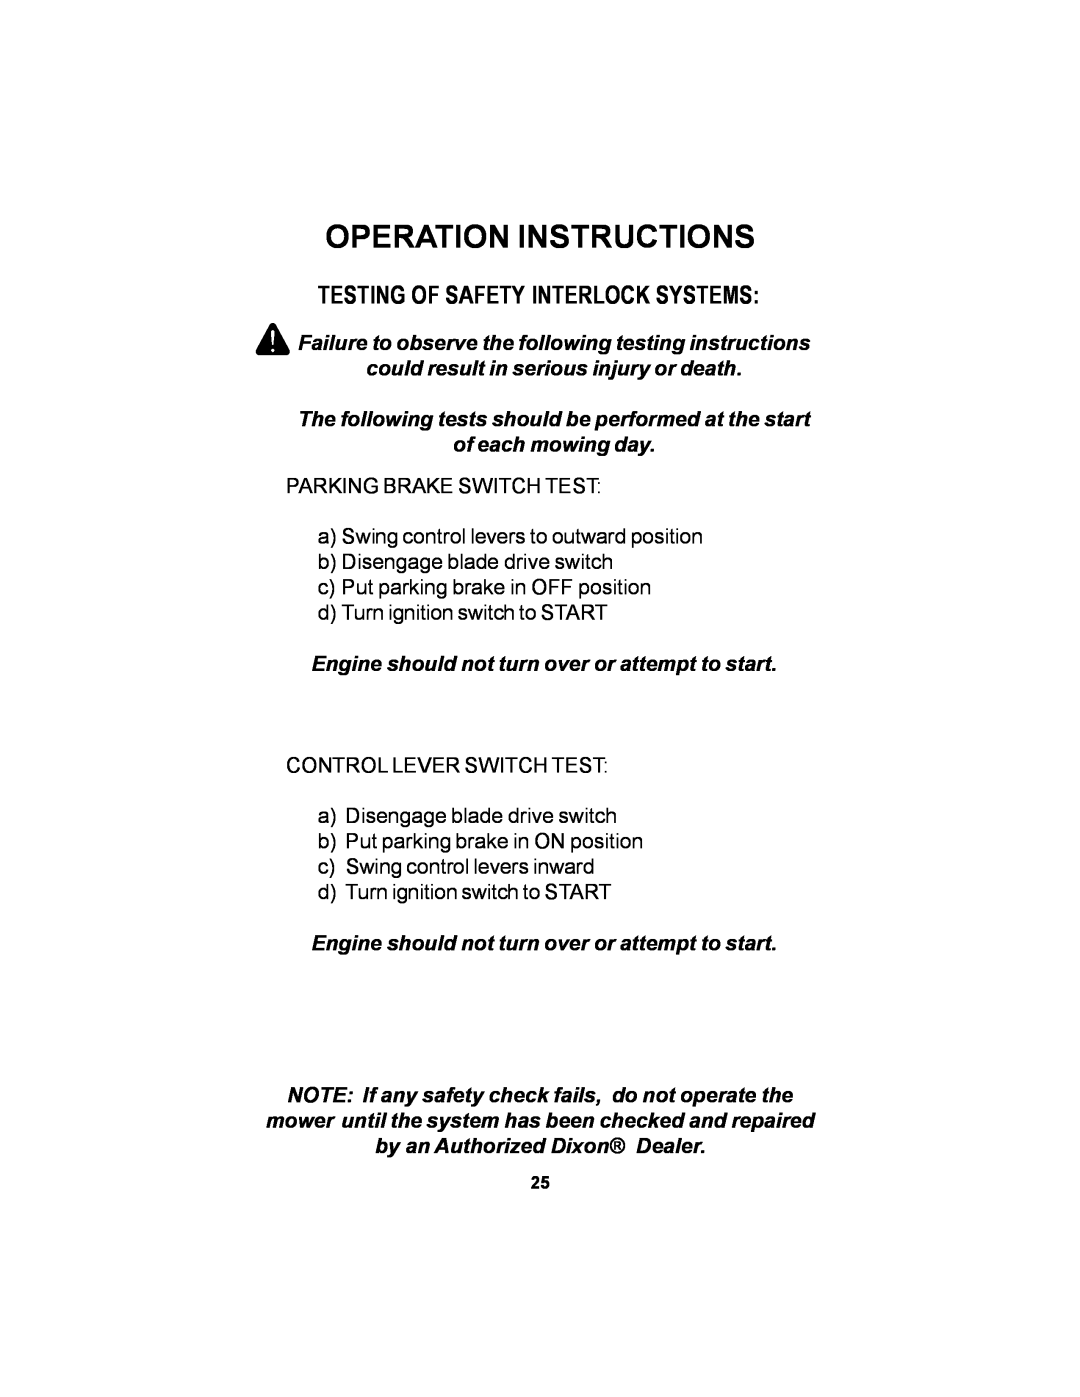 Dixon 11249-106 manual Testing Of Safety Interlock Systems, Operation Instructions 